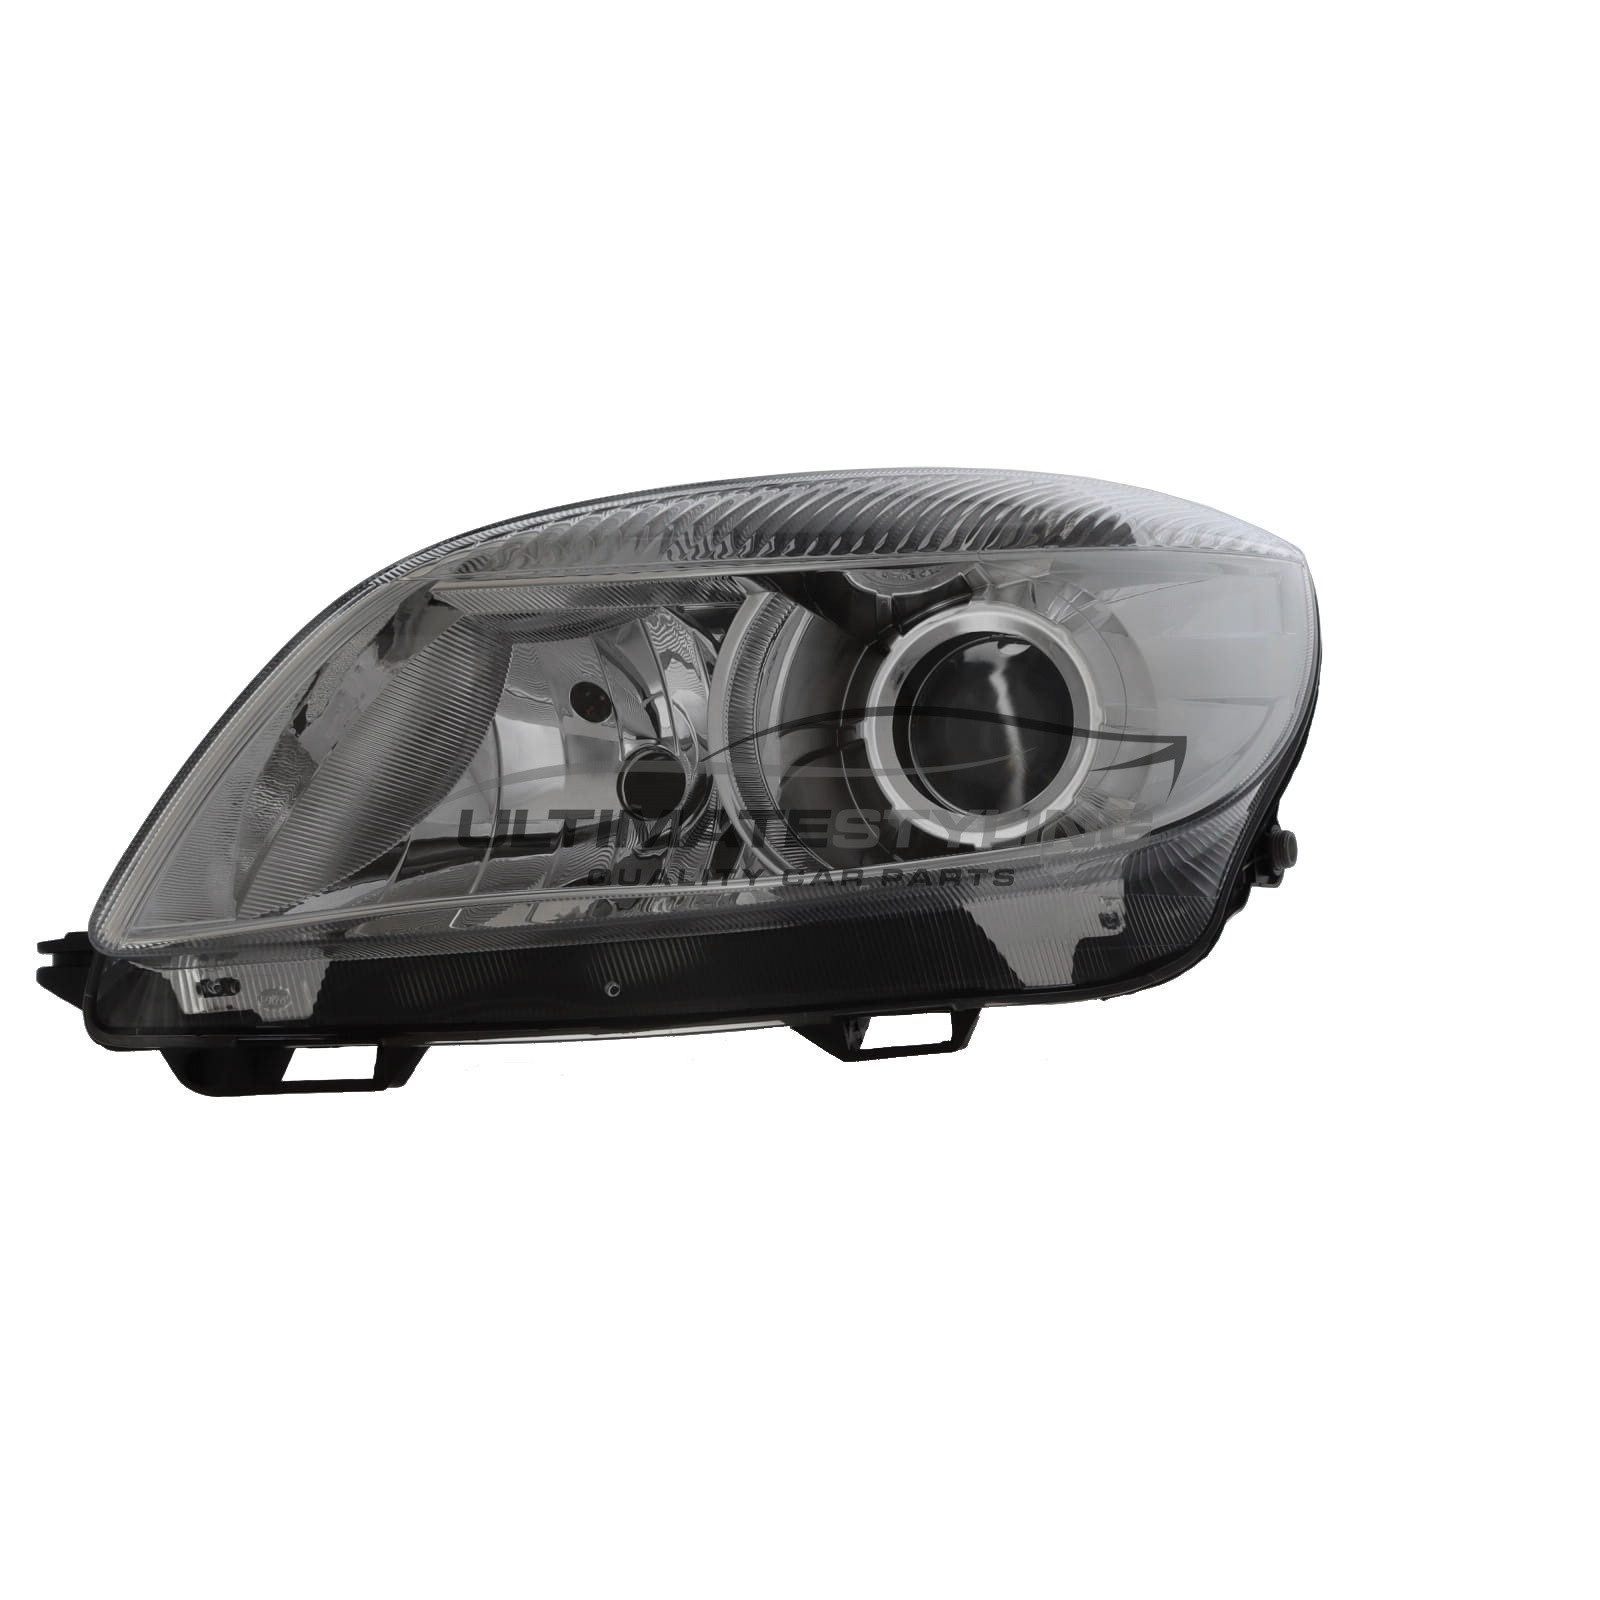 Skoda Fabia 2010-2015, Roomster 2010-2016 Halogen, Electric With Motor, Chrome Headlight / Headlamp (Projector Type) Passengers Side (LH)